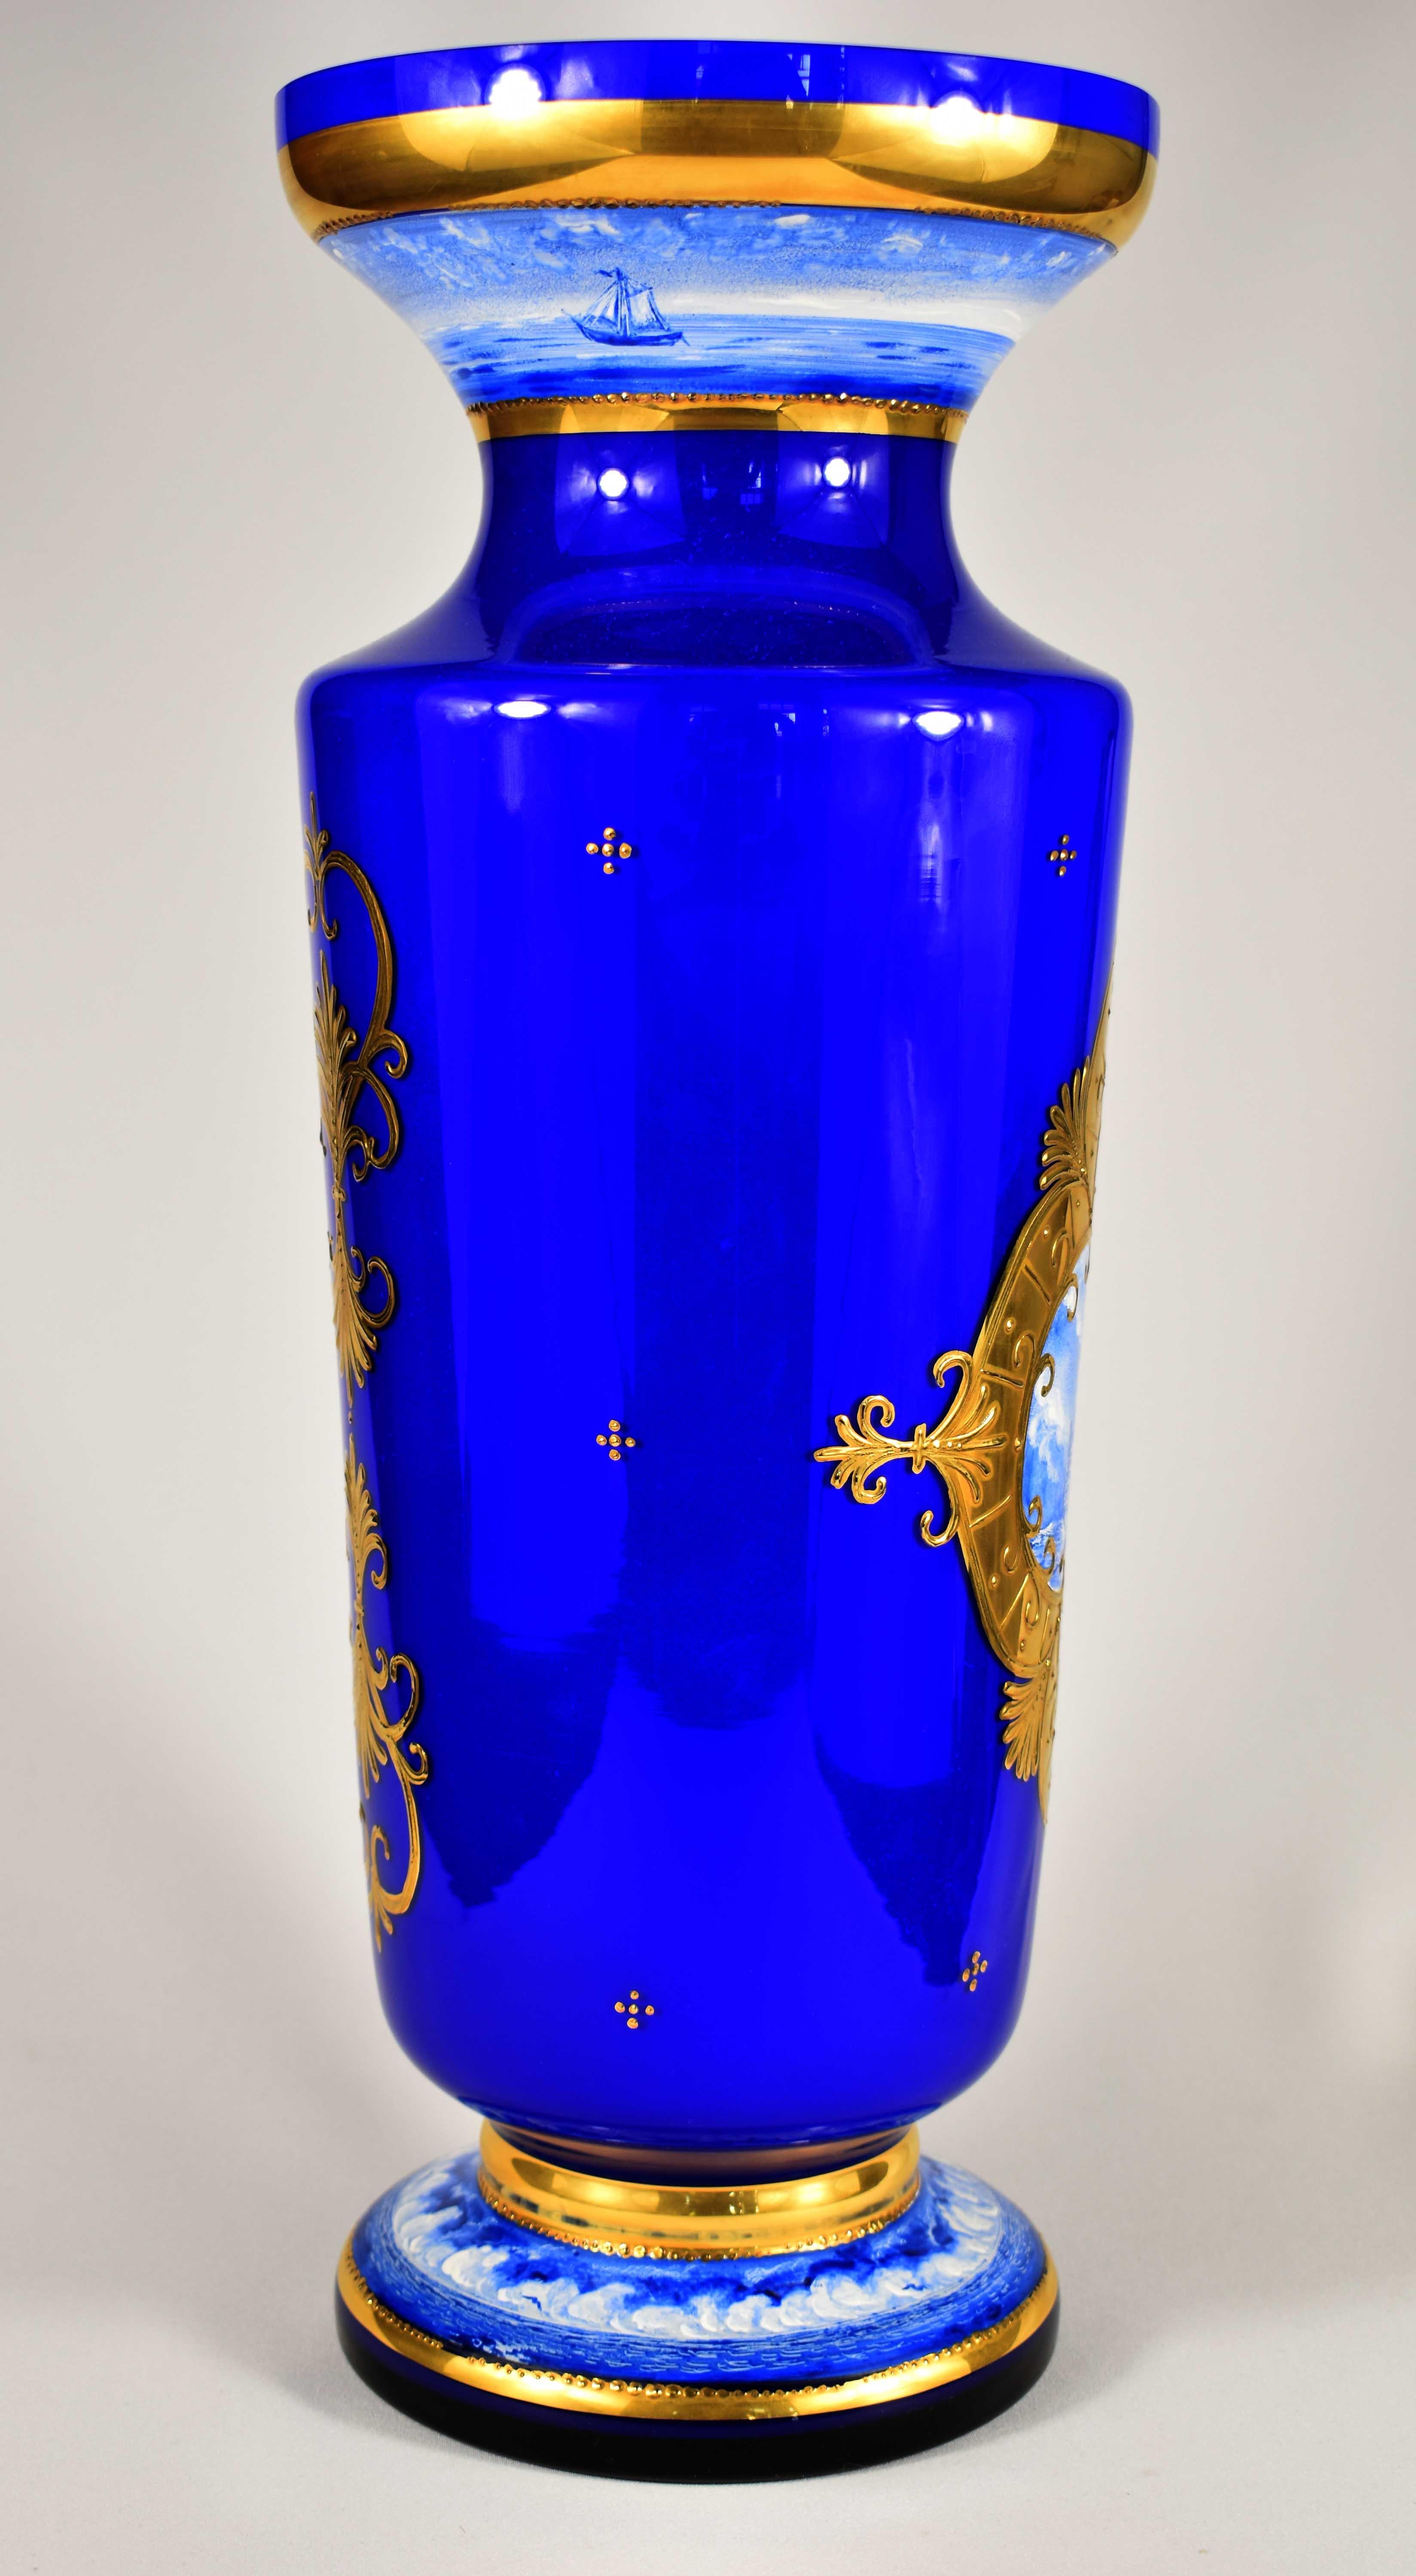 Hand-Crafted Large Opal Vase Overlay Blue Cobalt Glass, Painted Ships, Gilded, 20th Century For Sale